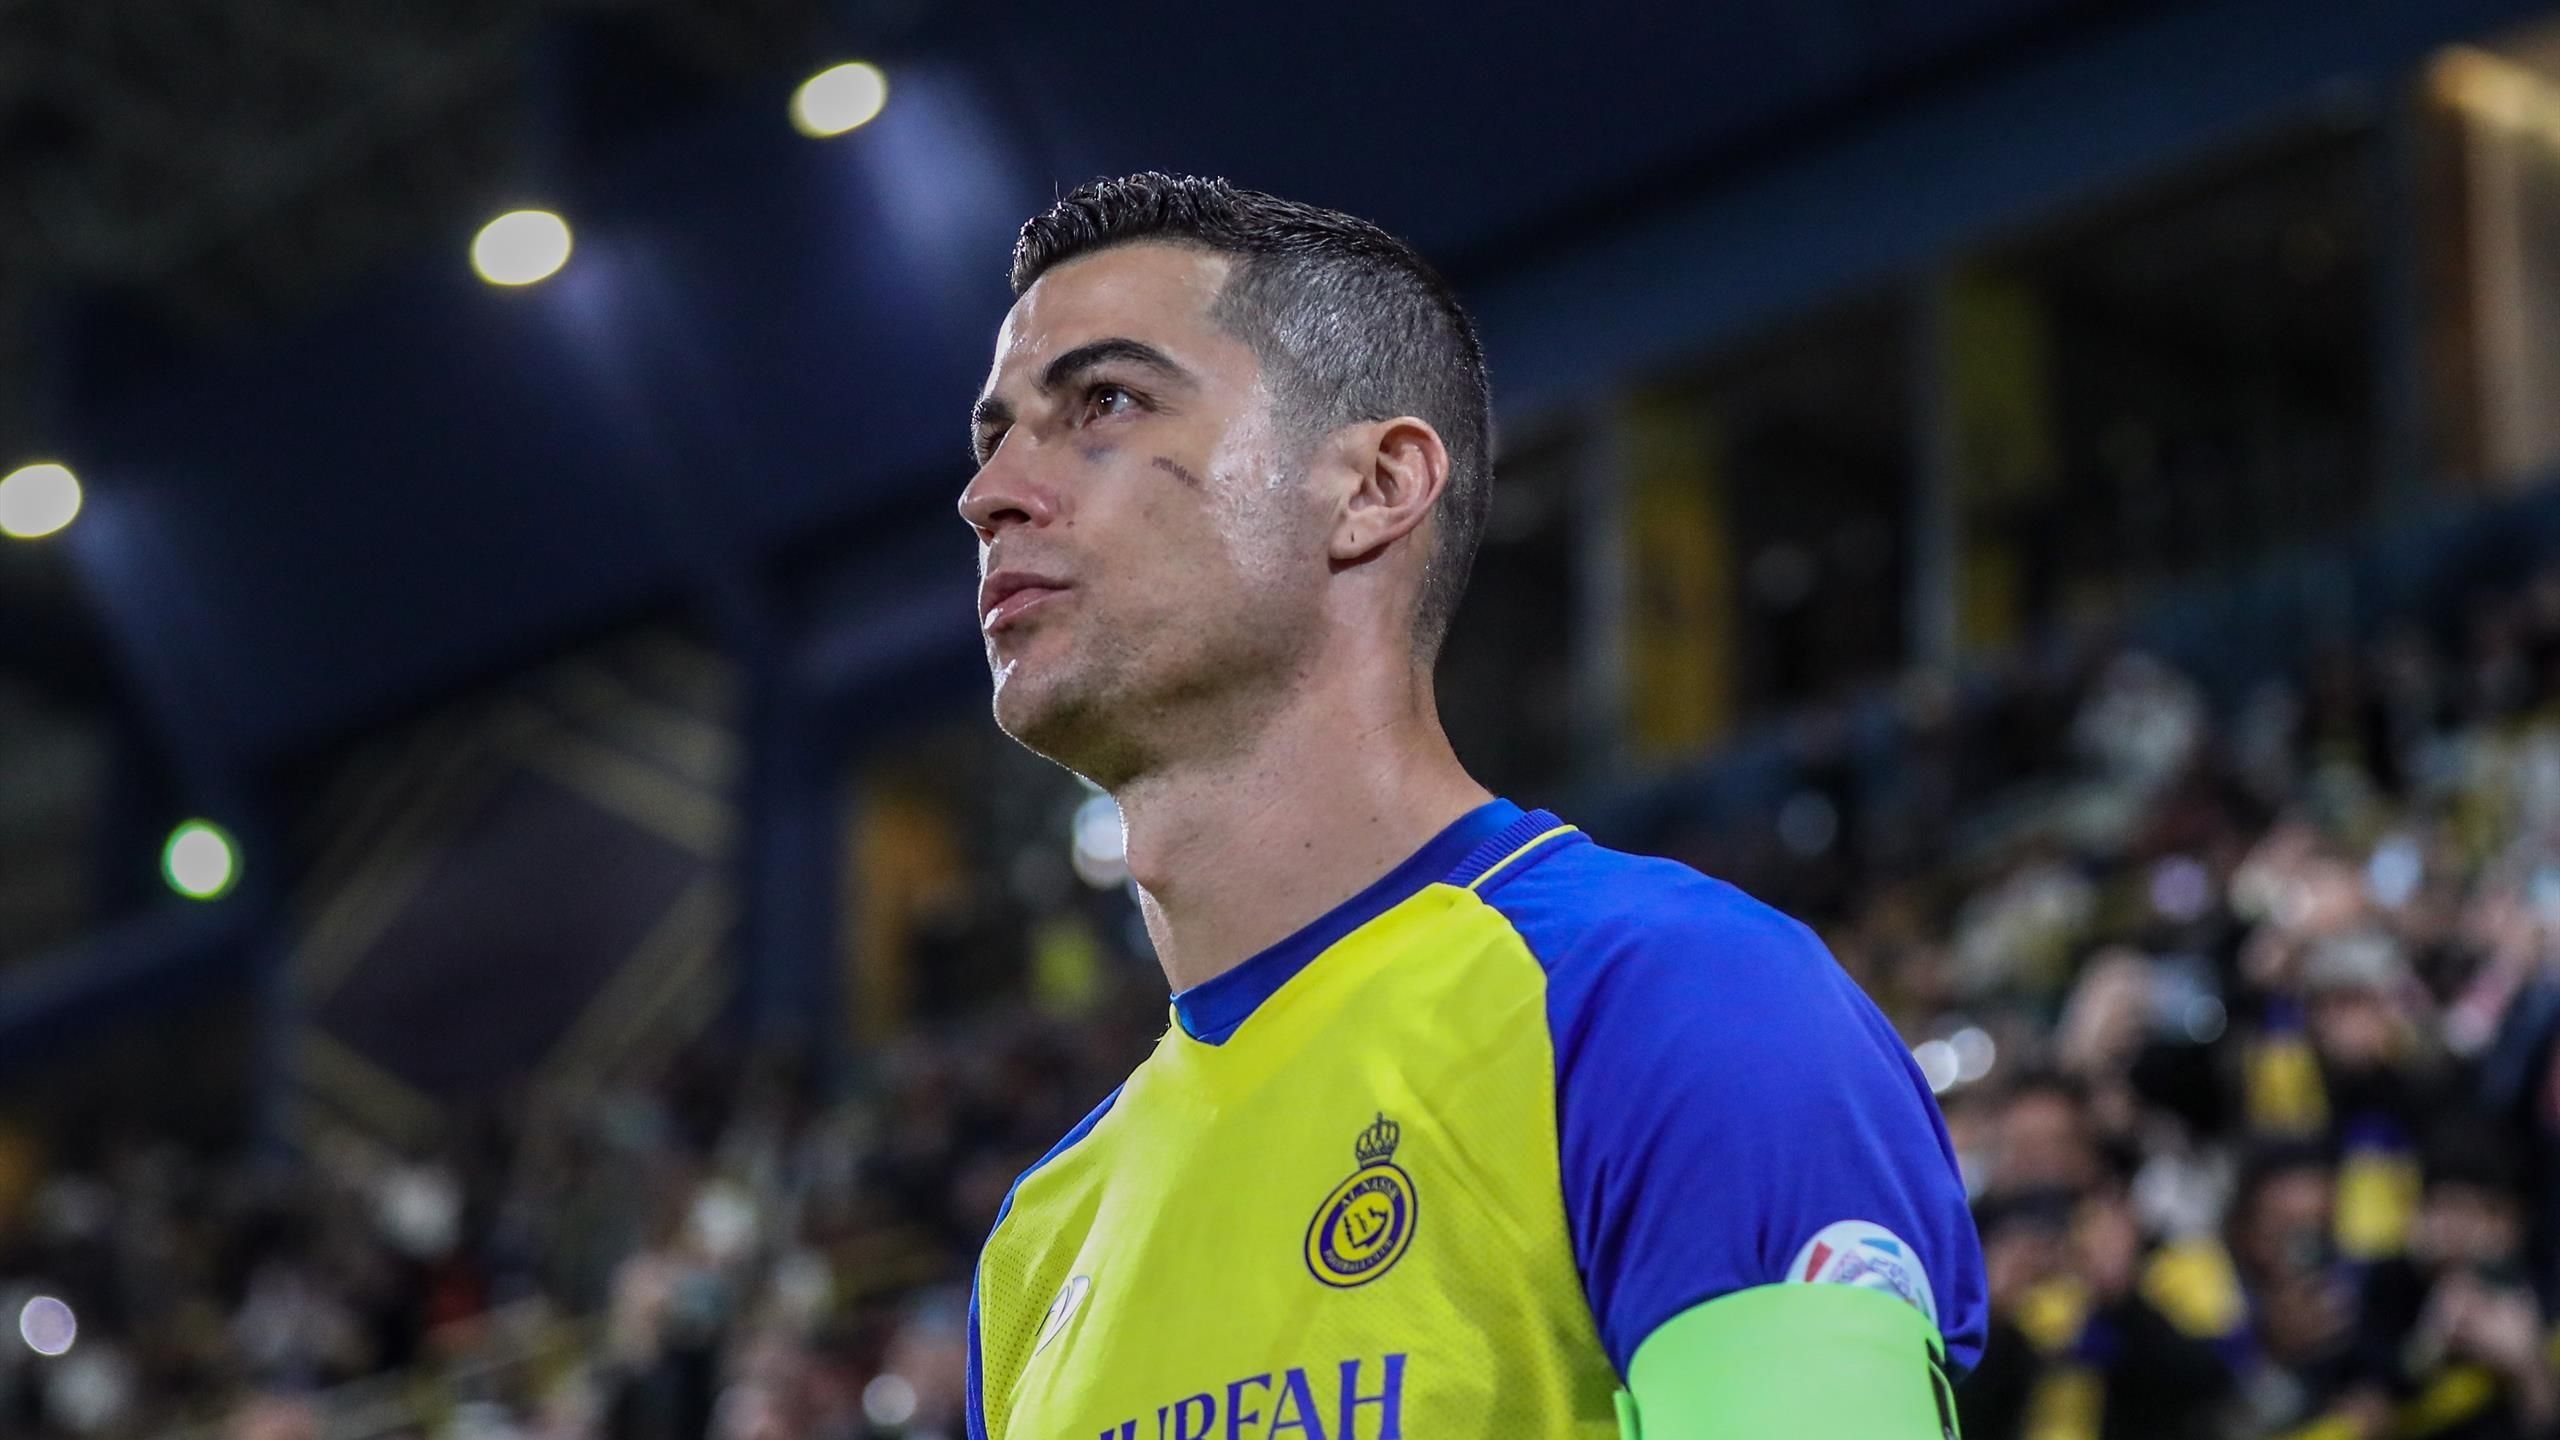 Former Chelsea Player Leboeuf Critisizes Ronaldo For Comments About Ligue 1 Level